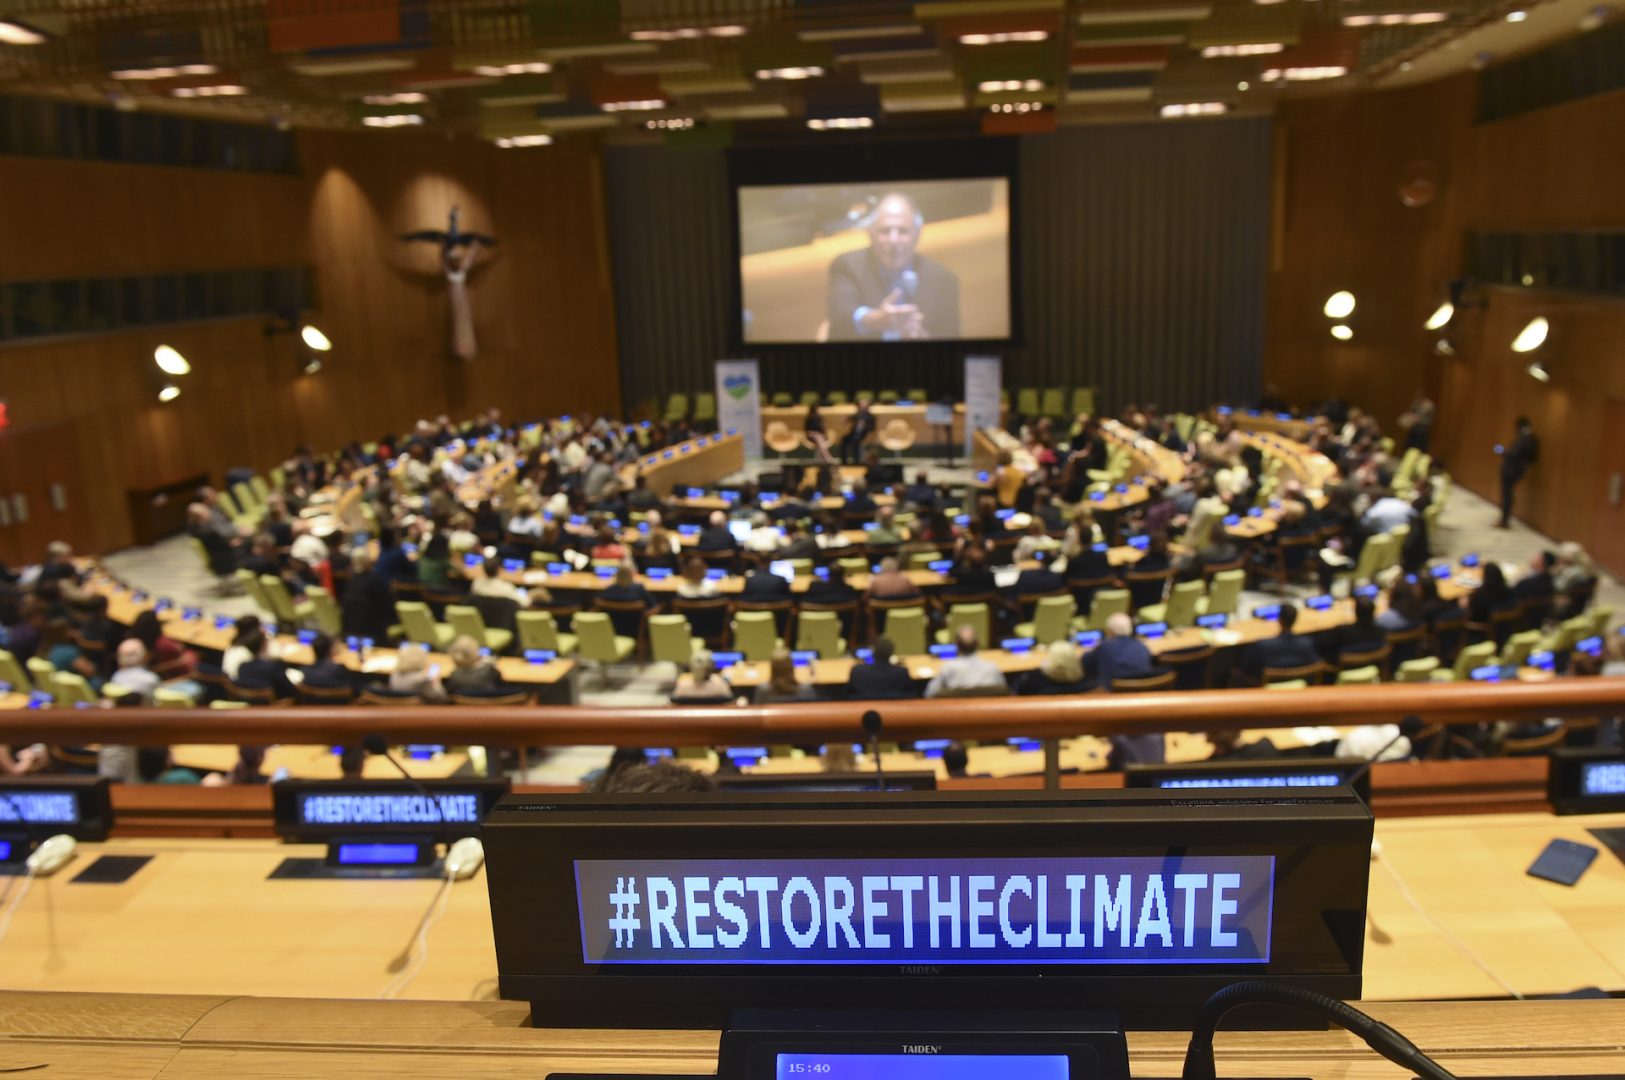 https://foundationforclimaterestoration.org/wp-content/uploads/2022/01/First-Annual-Global-Climate-Restoration-Forum-4-copy-1625x1080.jpg